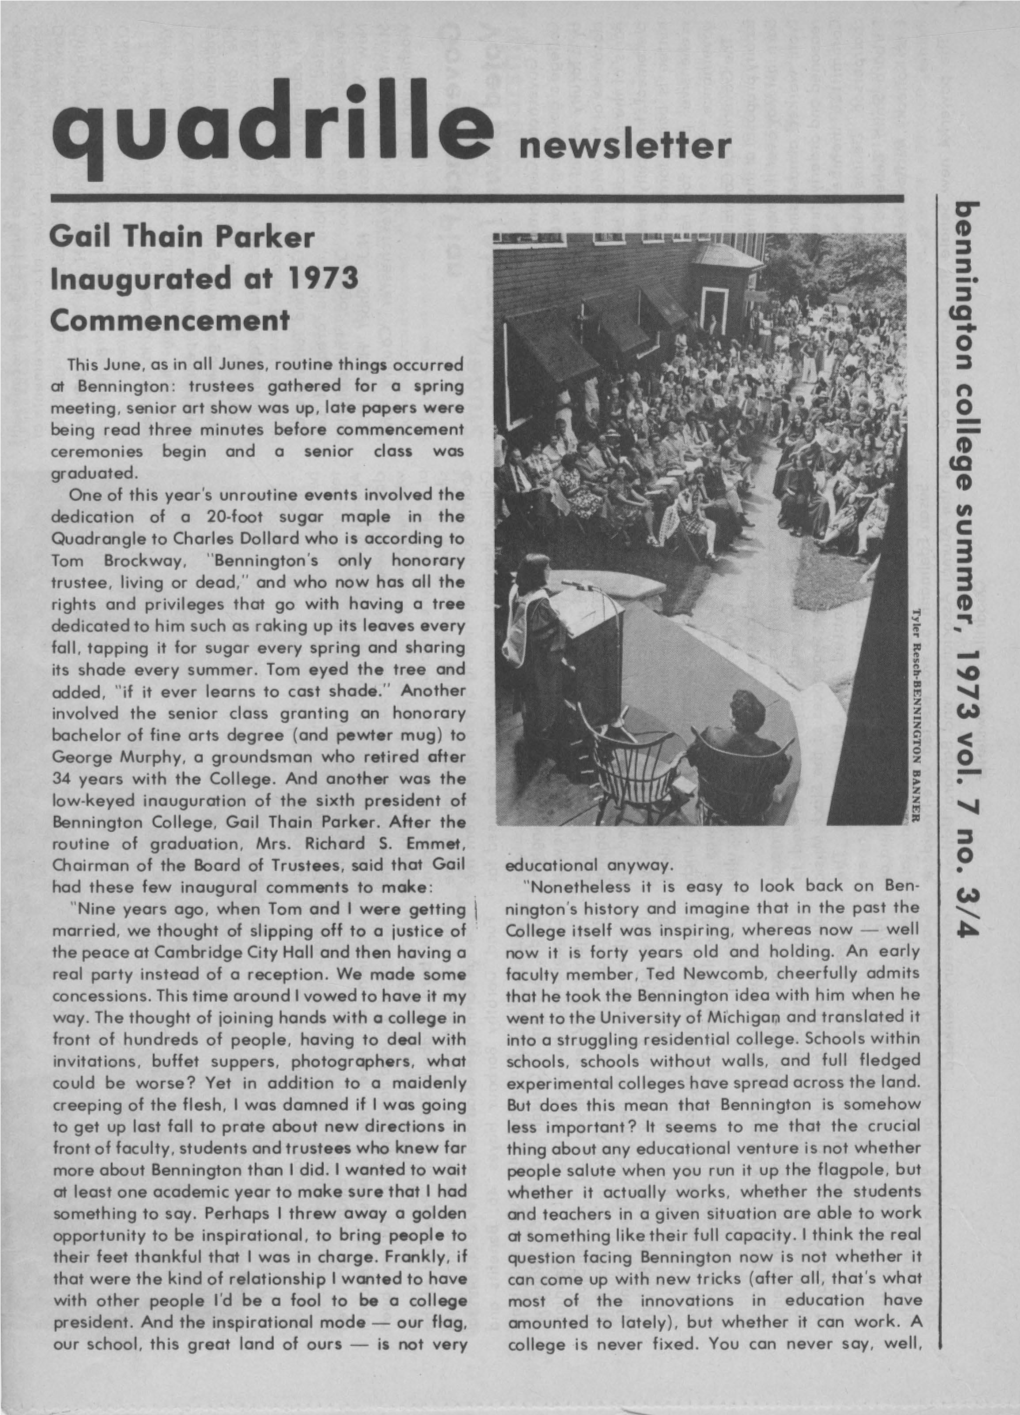 Quadrille Newsletter Er CD Gail Thain Parker ::S ::S Inaugurated at 1973 -·::S Commencement Ca